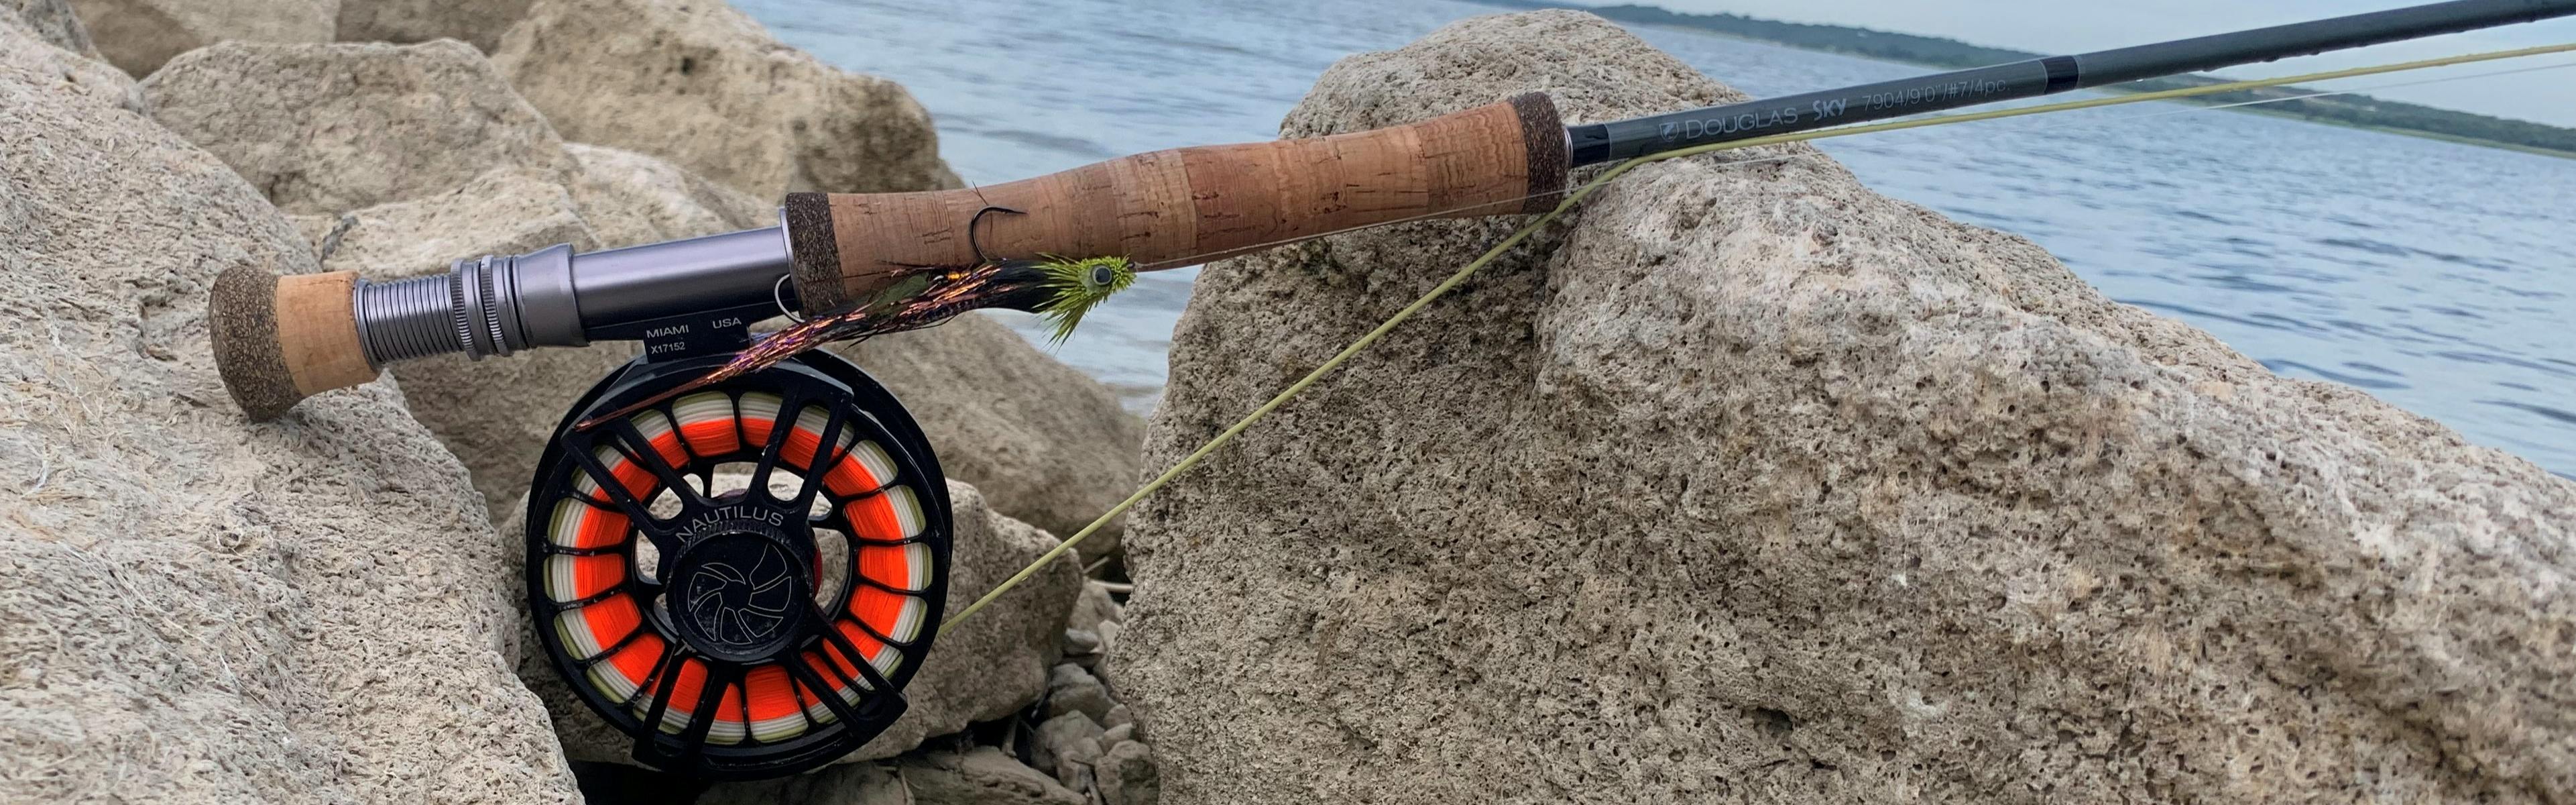 The author's fly rod set-up rests on a rock by the water with a streamer attached to the line.